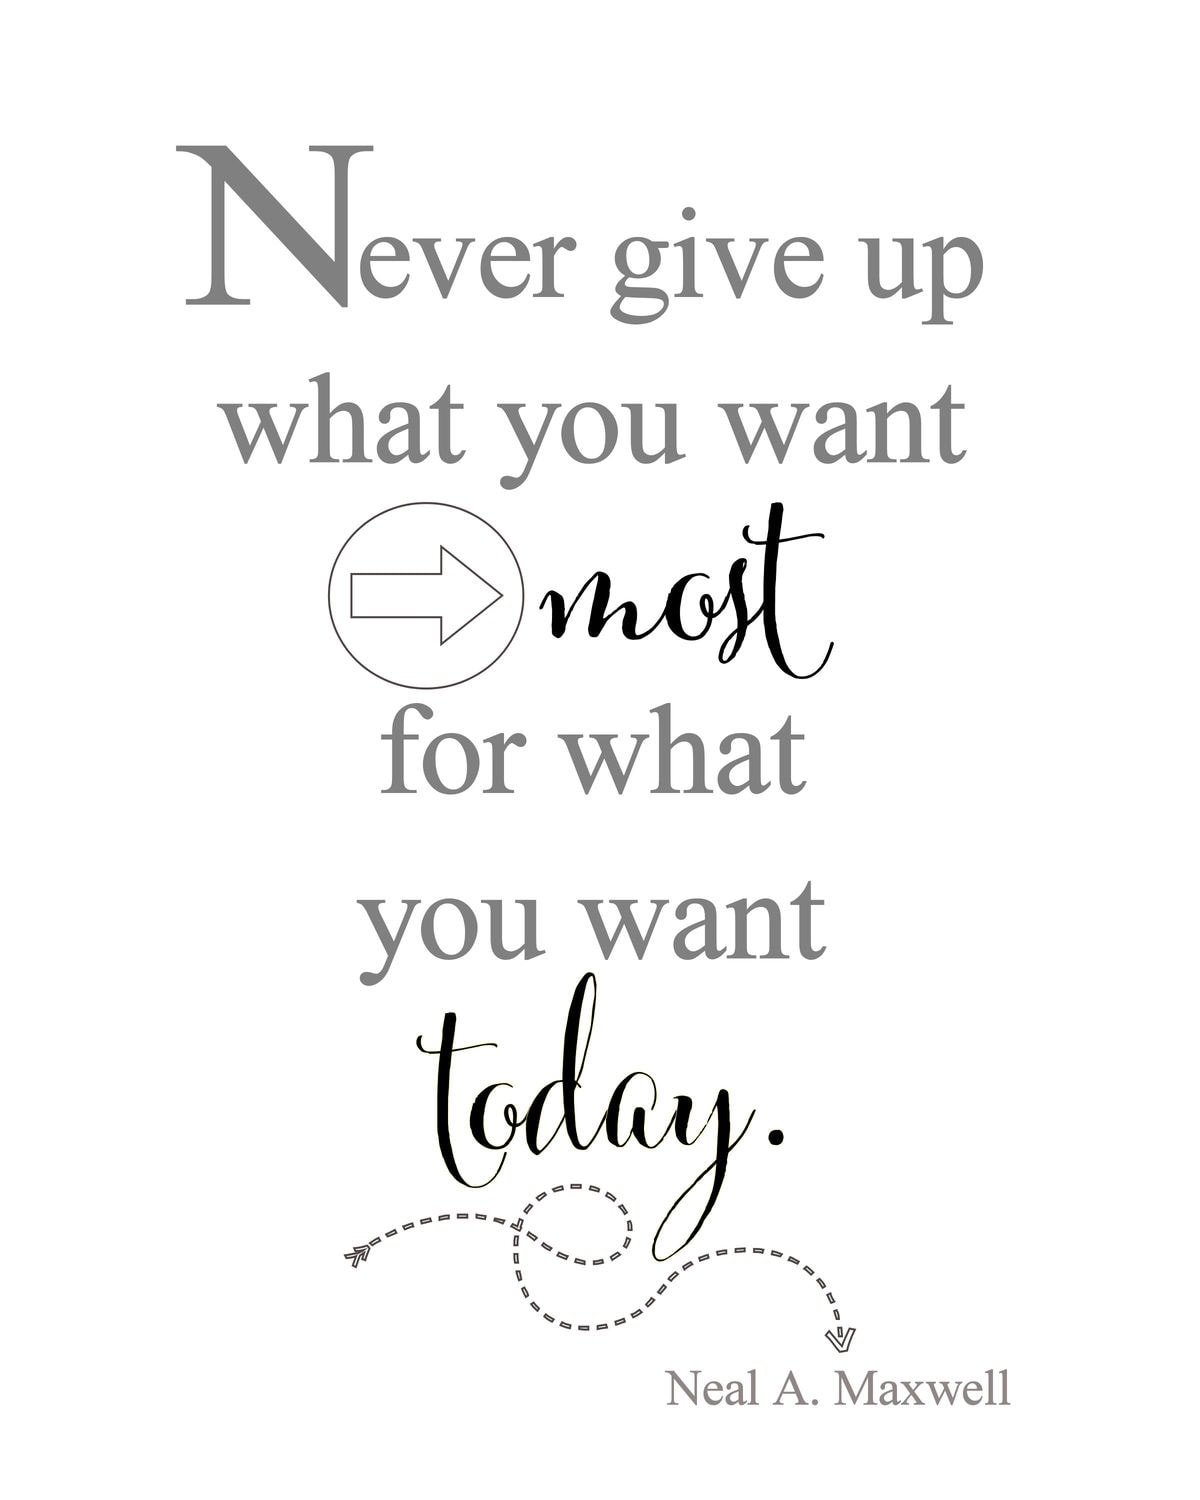 Never give up what you want most, for what you want today FREE print. Use as decor in a frame or it would make a great gift.